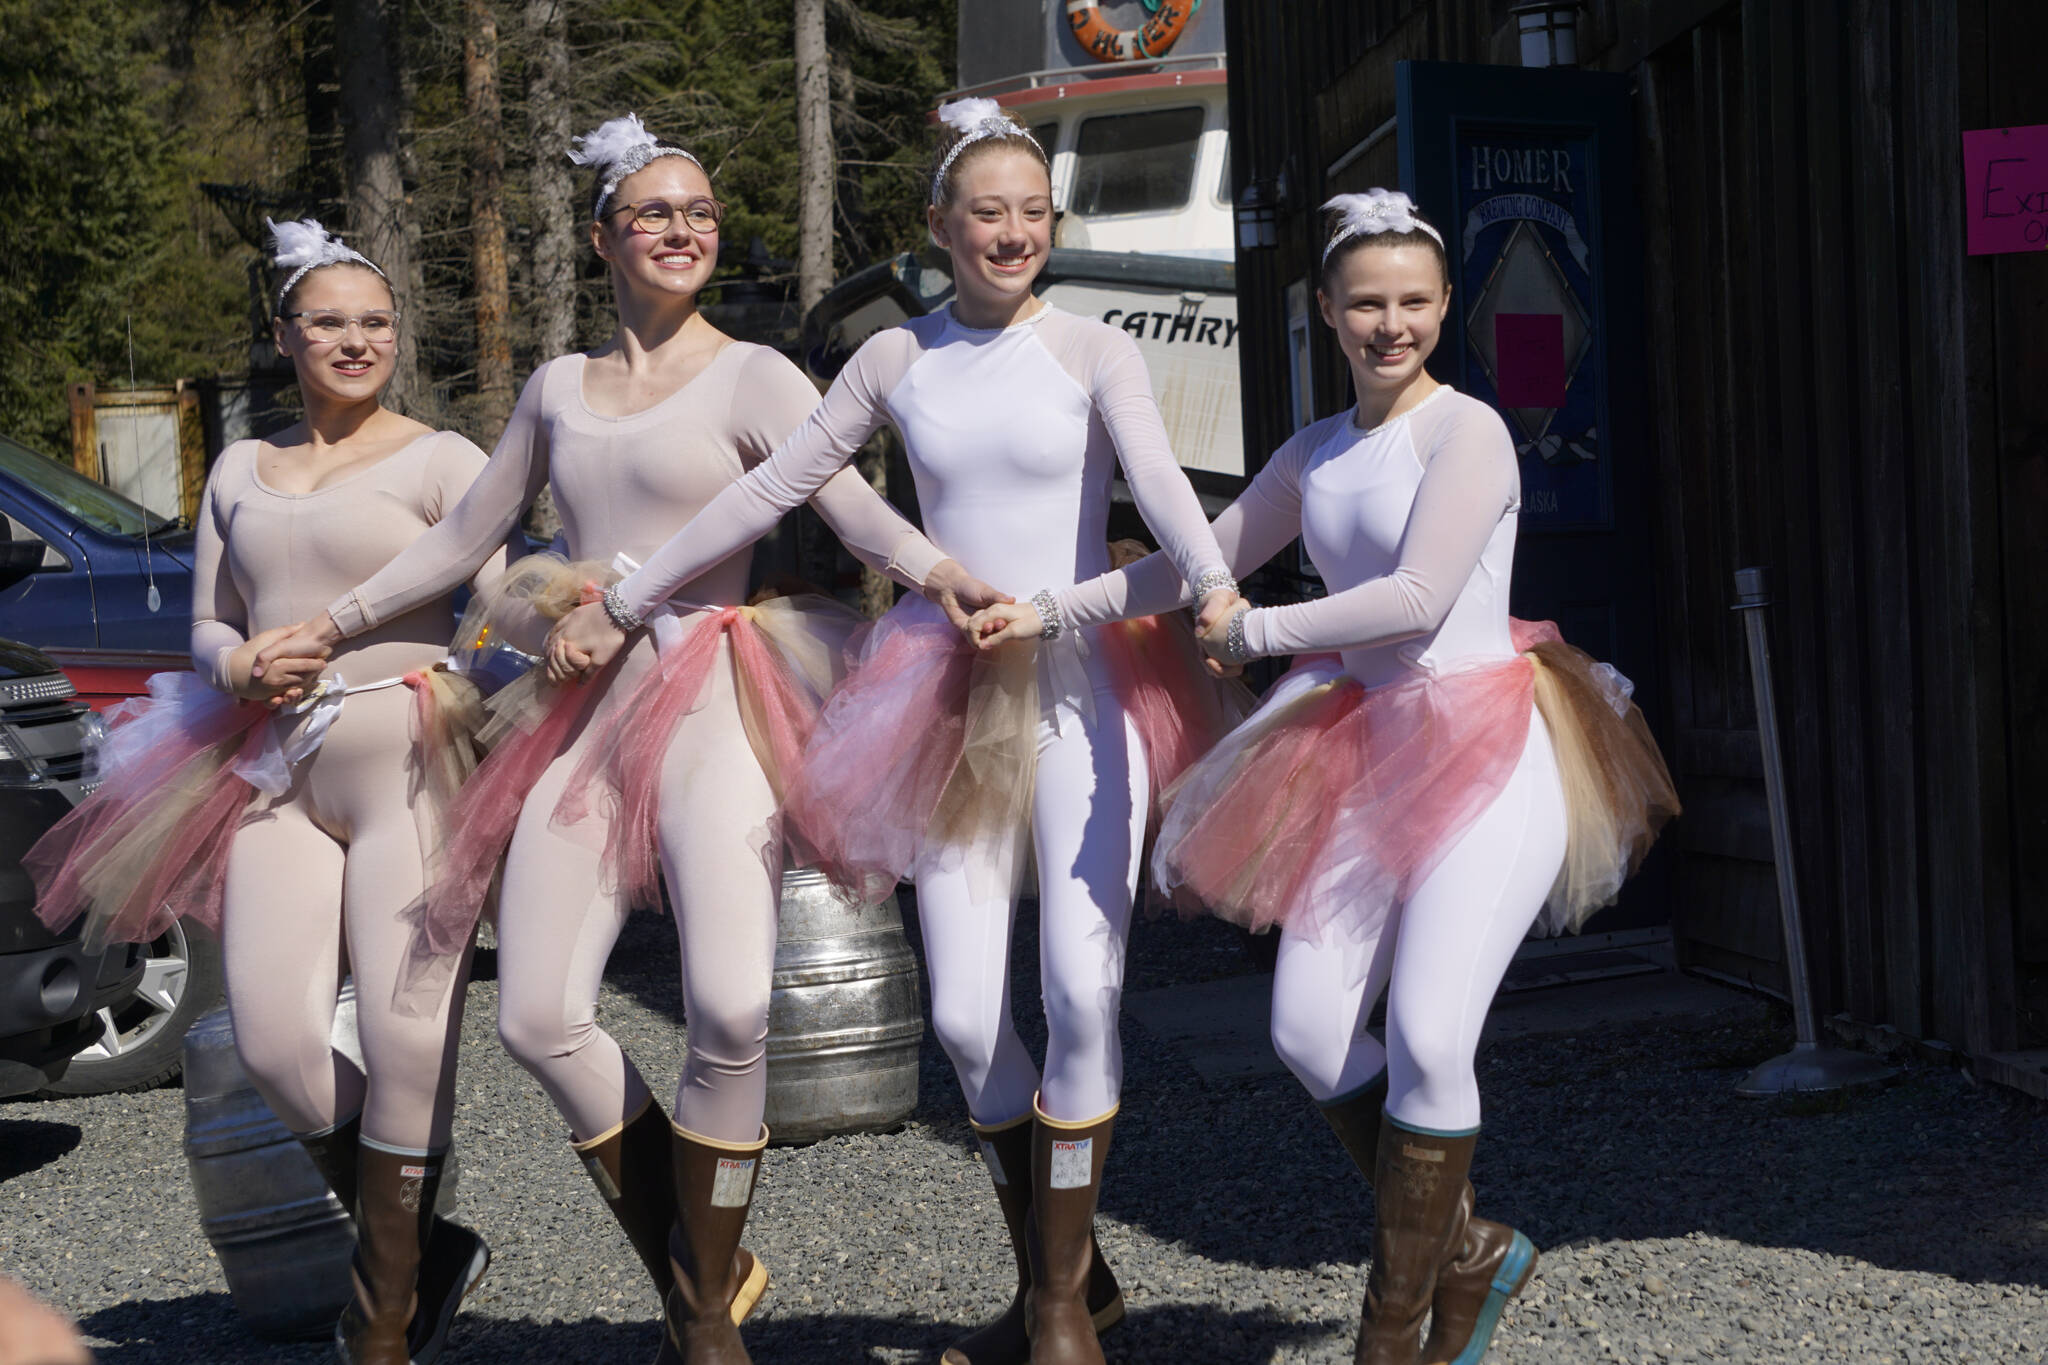 Members of Breezy Berryman’s dance troupe make an appearance for the Homer Brewing Company’s bird calling contest during the Kachemak Bay Shorebird Festival on Saturday, May 7, 2022, in Homer, Alaska. The troupe performed “The Ballet of the Birds” earlier that day and later that evening at the Land’s End Quarterdeck. From left to right are Christina Platter, Ireland Styvar, Reilly-Sue Baker and Natalia Sherwood. (Photo by Michael Armstrong/Homer News)